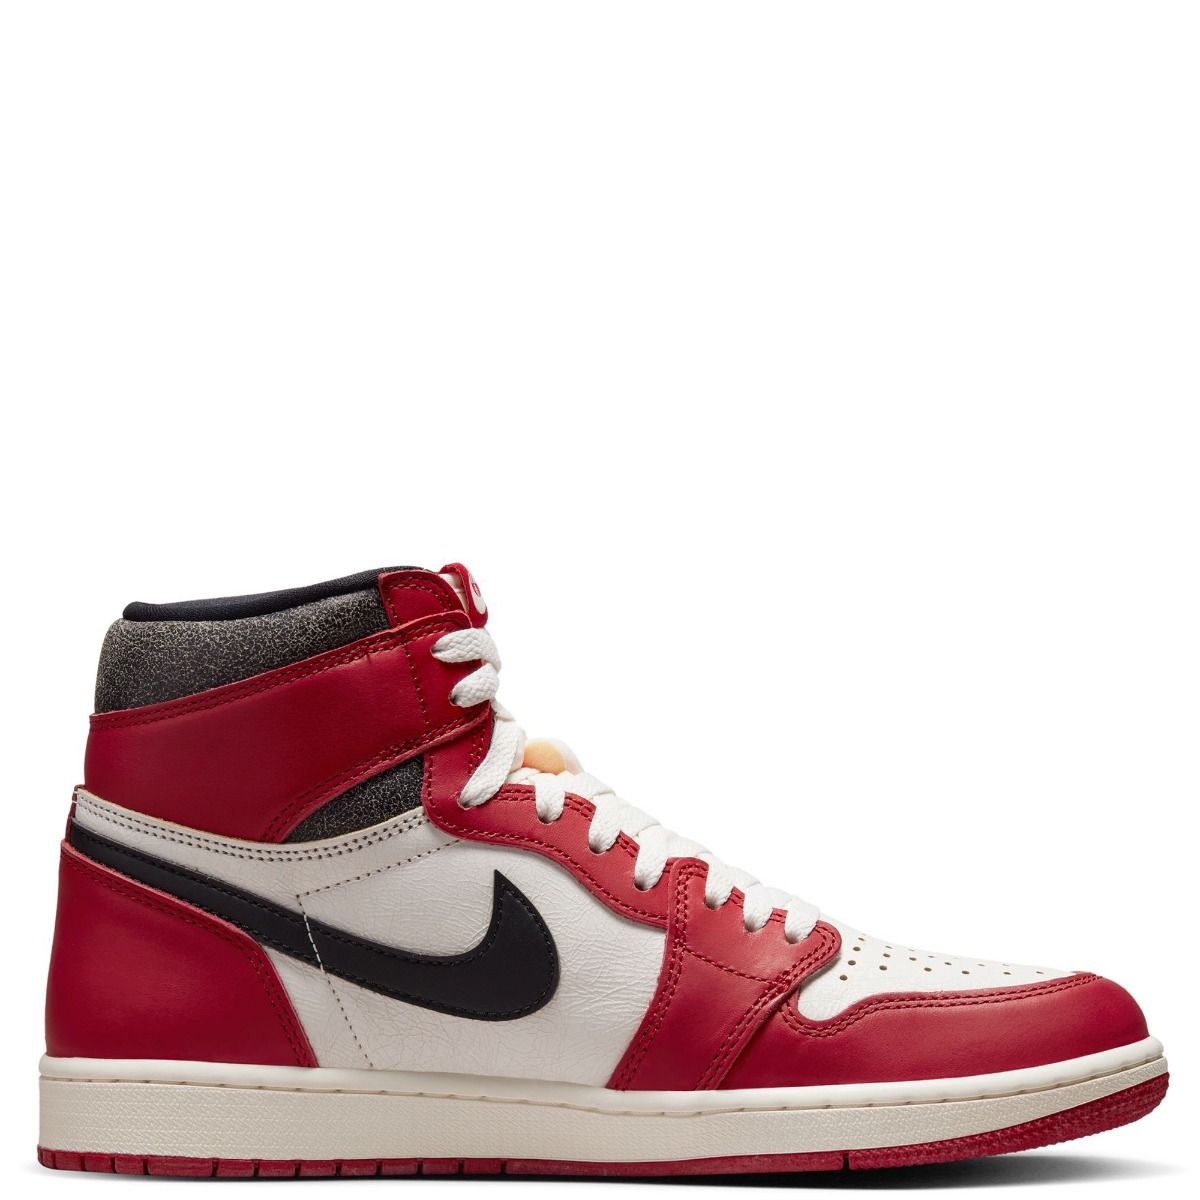 How To Draw Air Jordan 1 Shoes 